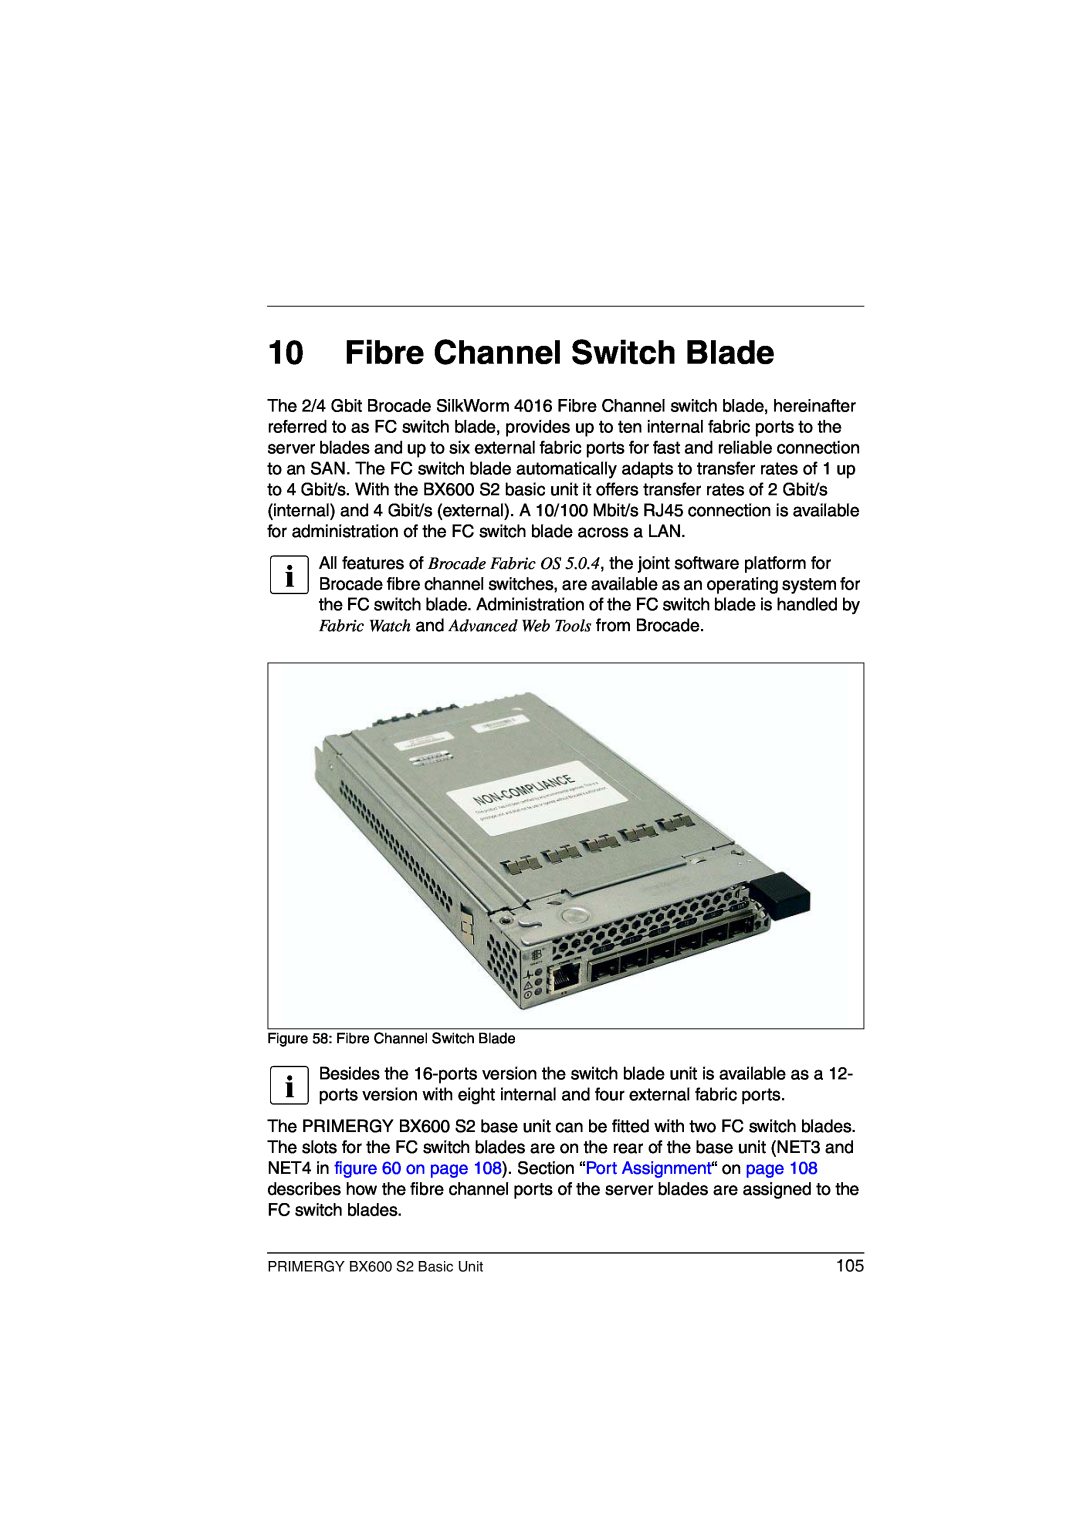 Fujitsu BX600 S2 manual Fibre Channel Switch Blade, Fabric Watch and Advanced Web Tools from Brocade 